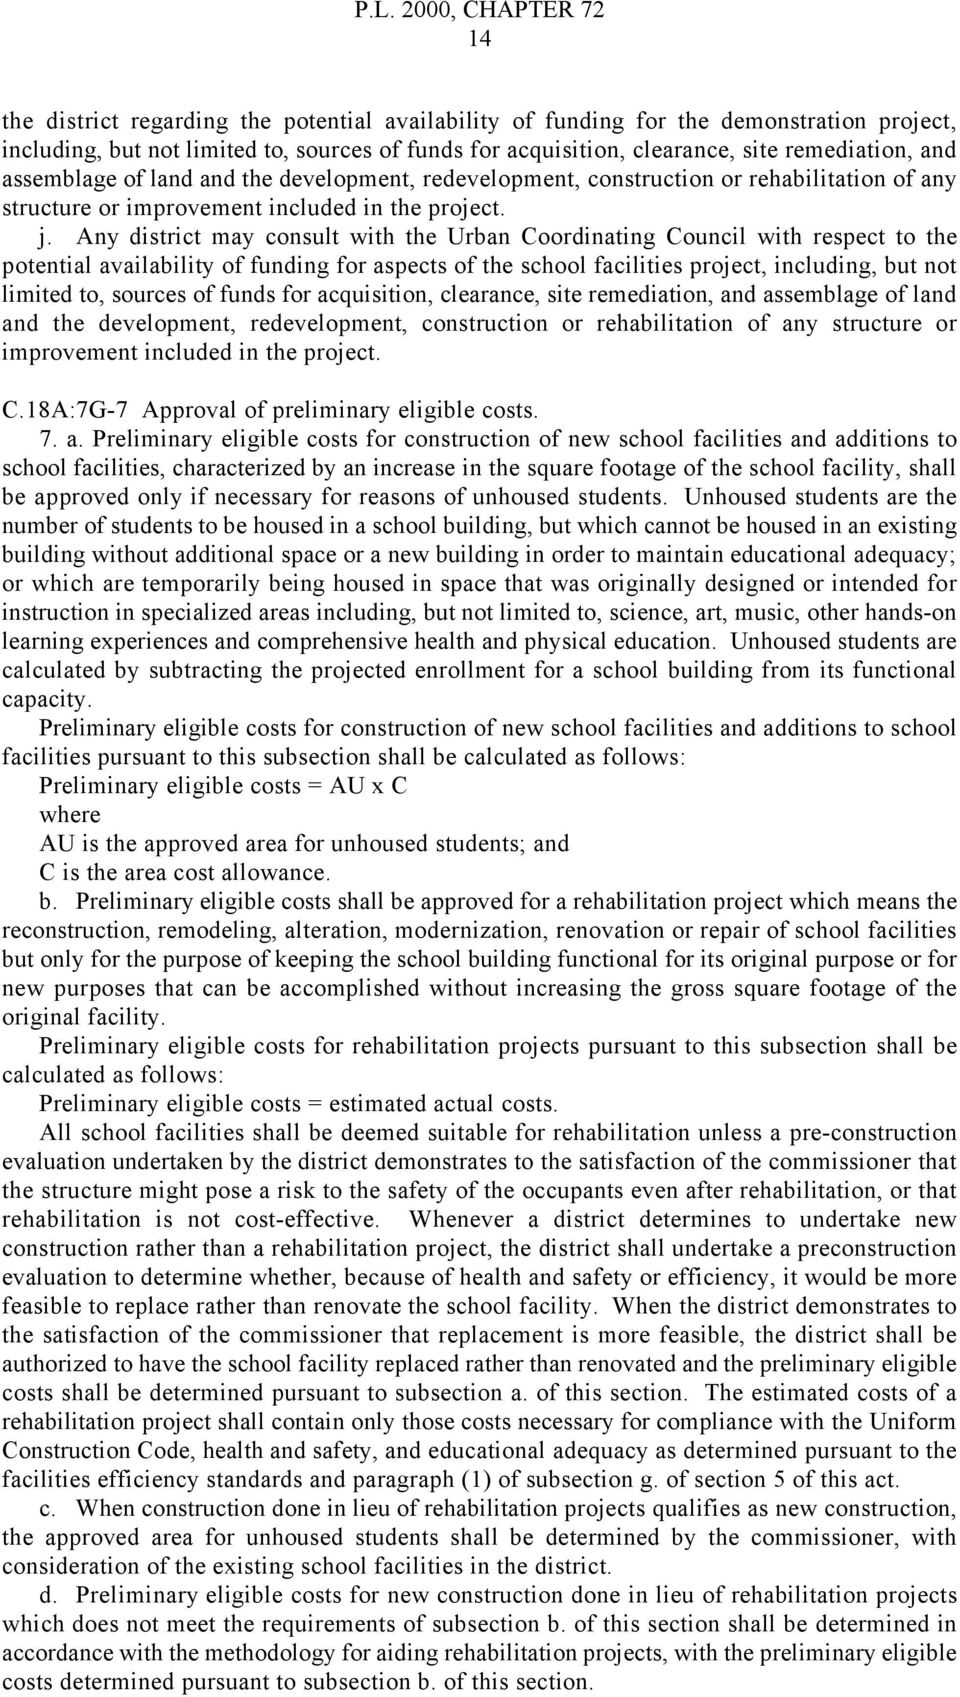 Any district may consult with the Urban Coordinating Council with respect to the potential availability of funding for aspects of the school facilities project, including, but not limited to, sources